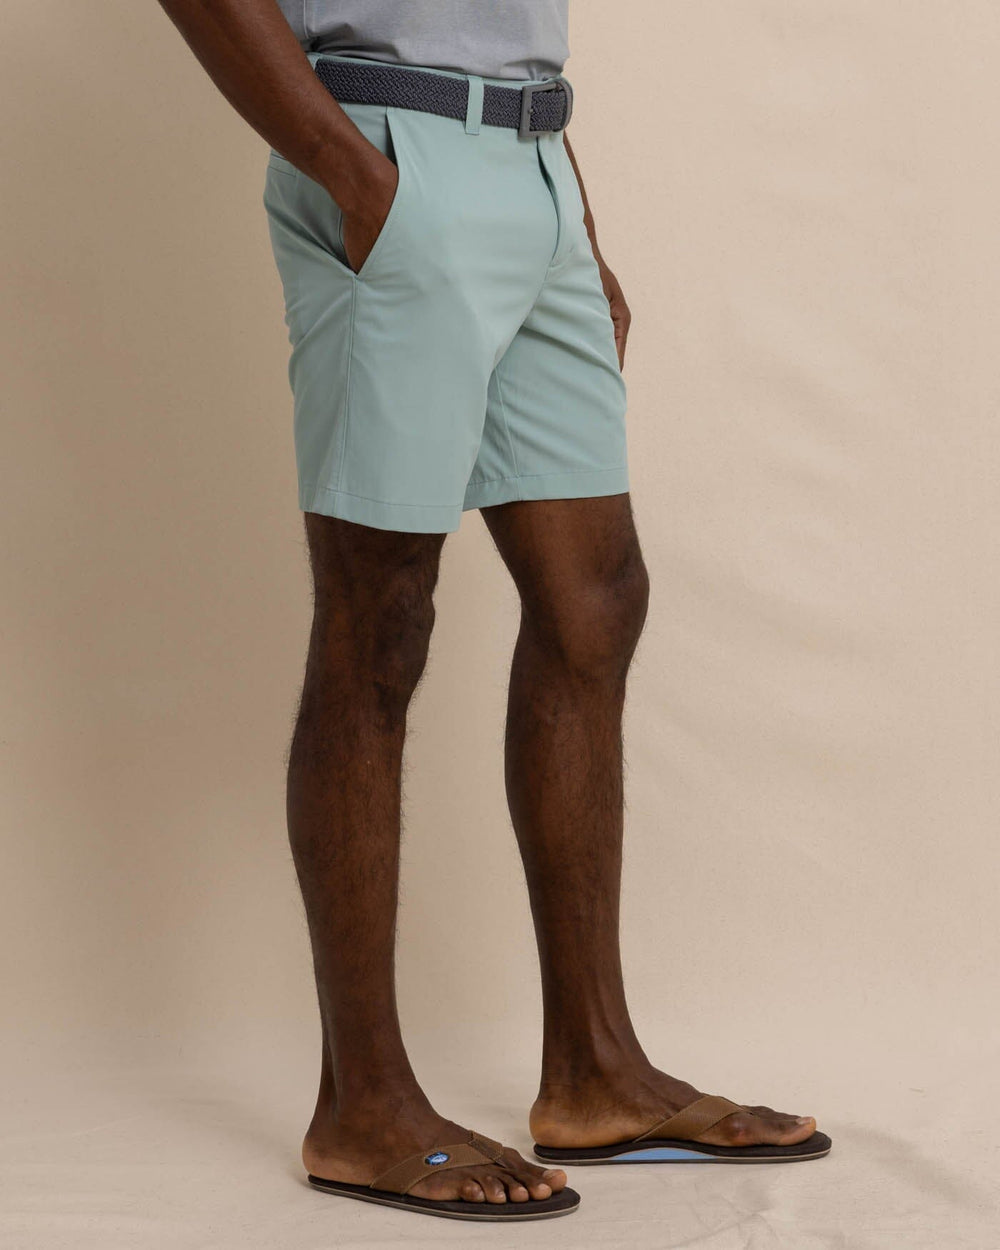 The front view of the Southern Tide gulf 8 inch brrr die performance short by Southern Tide - Green Surf